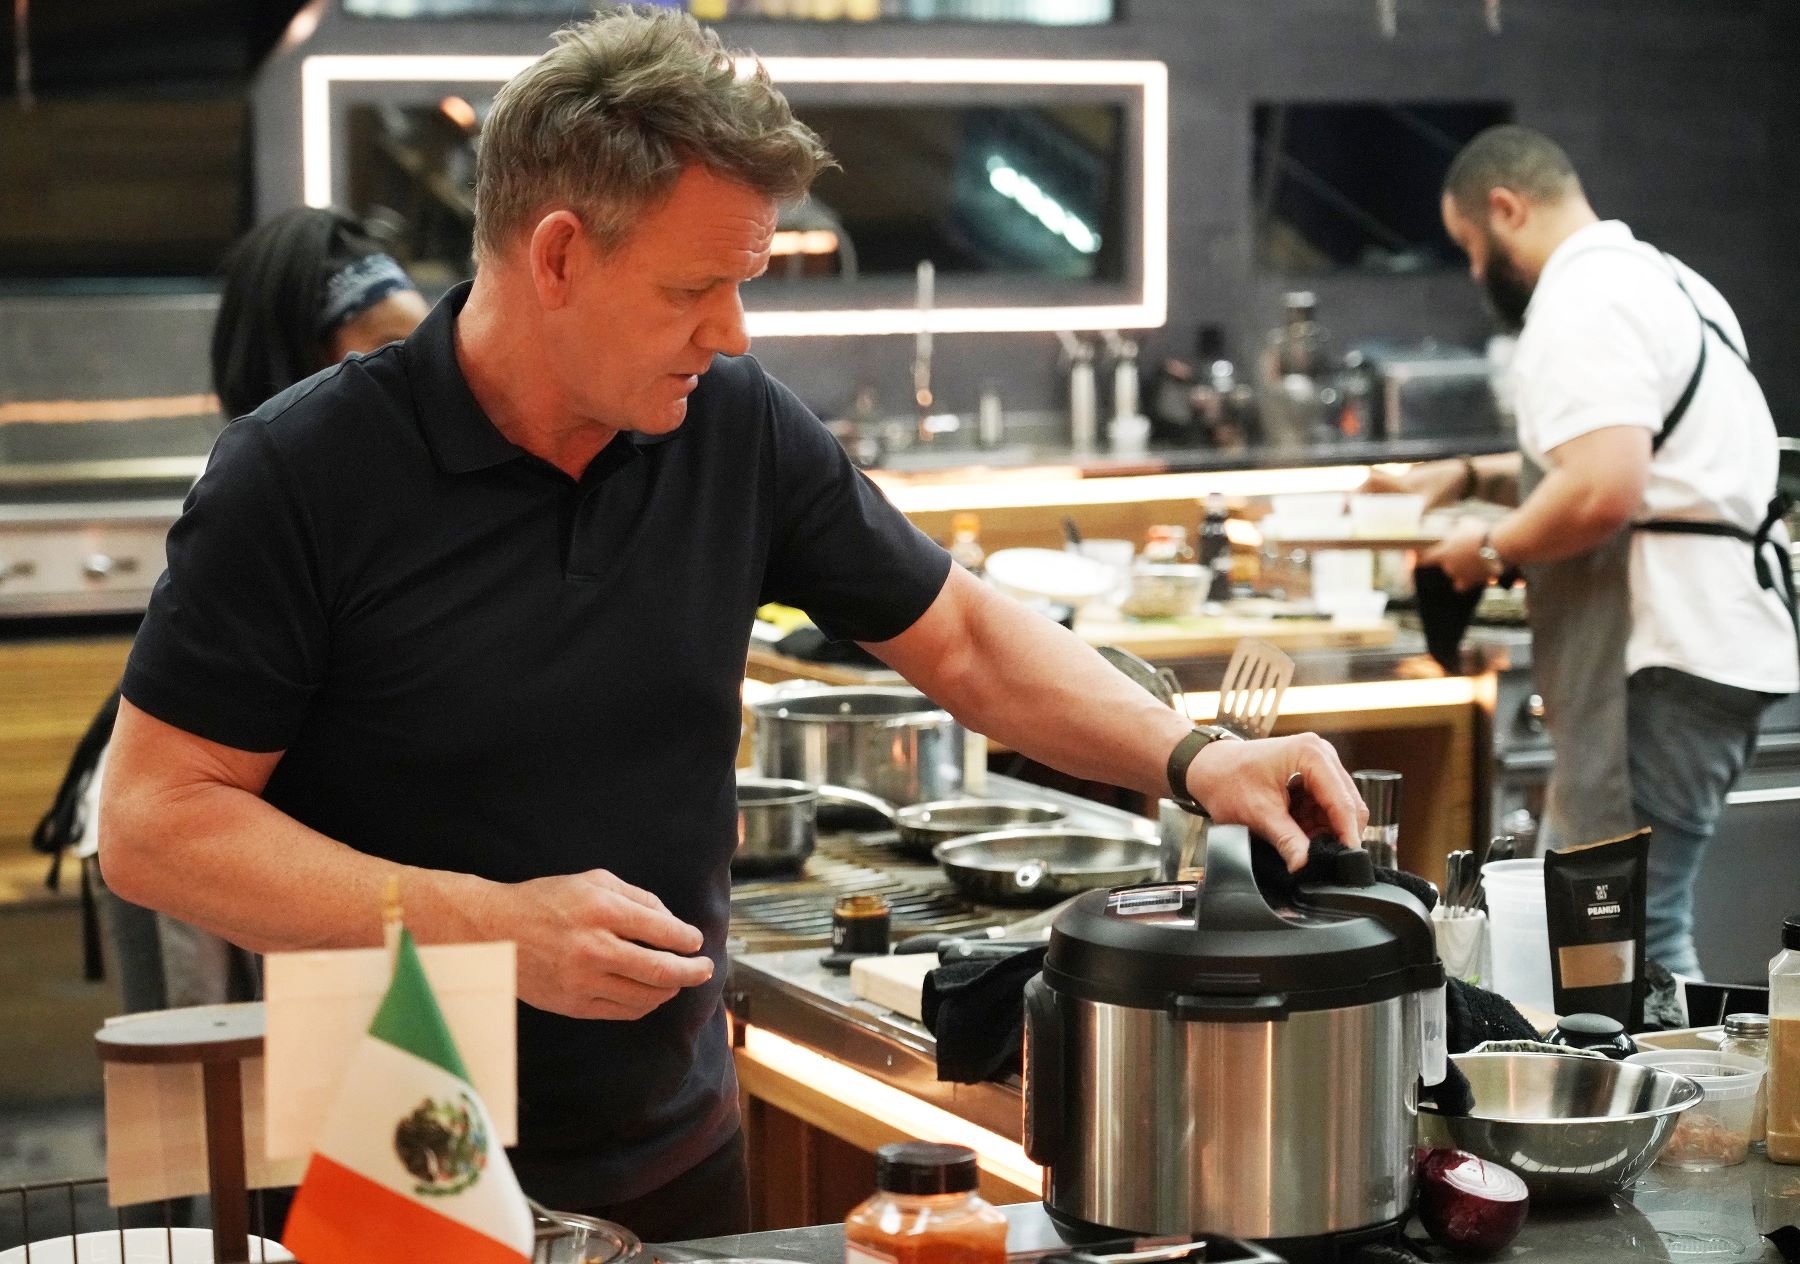 Chef Gordon Ramsay on the Fusion Confusion episode of 'Next Level Chef' aired on Fox